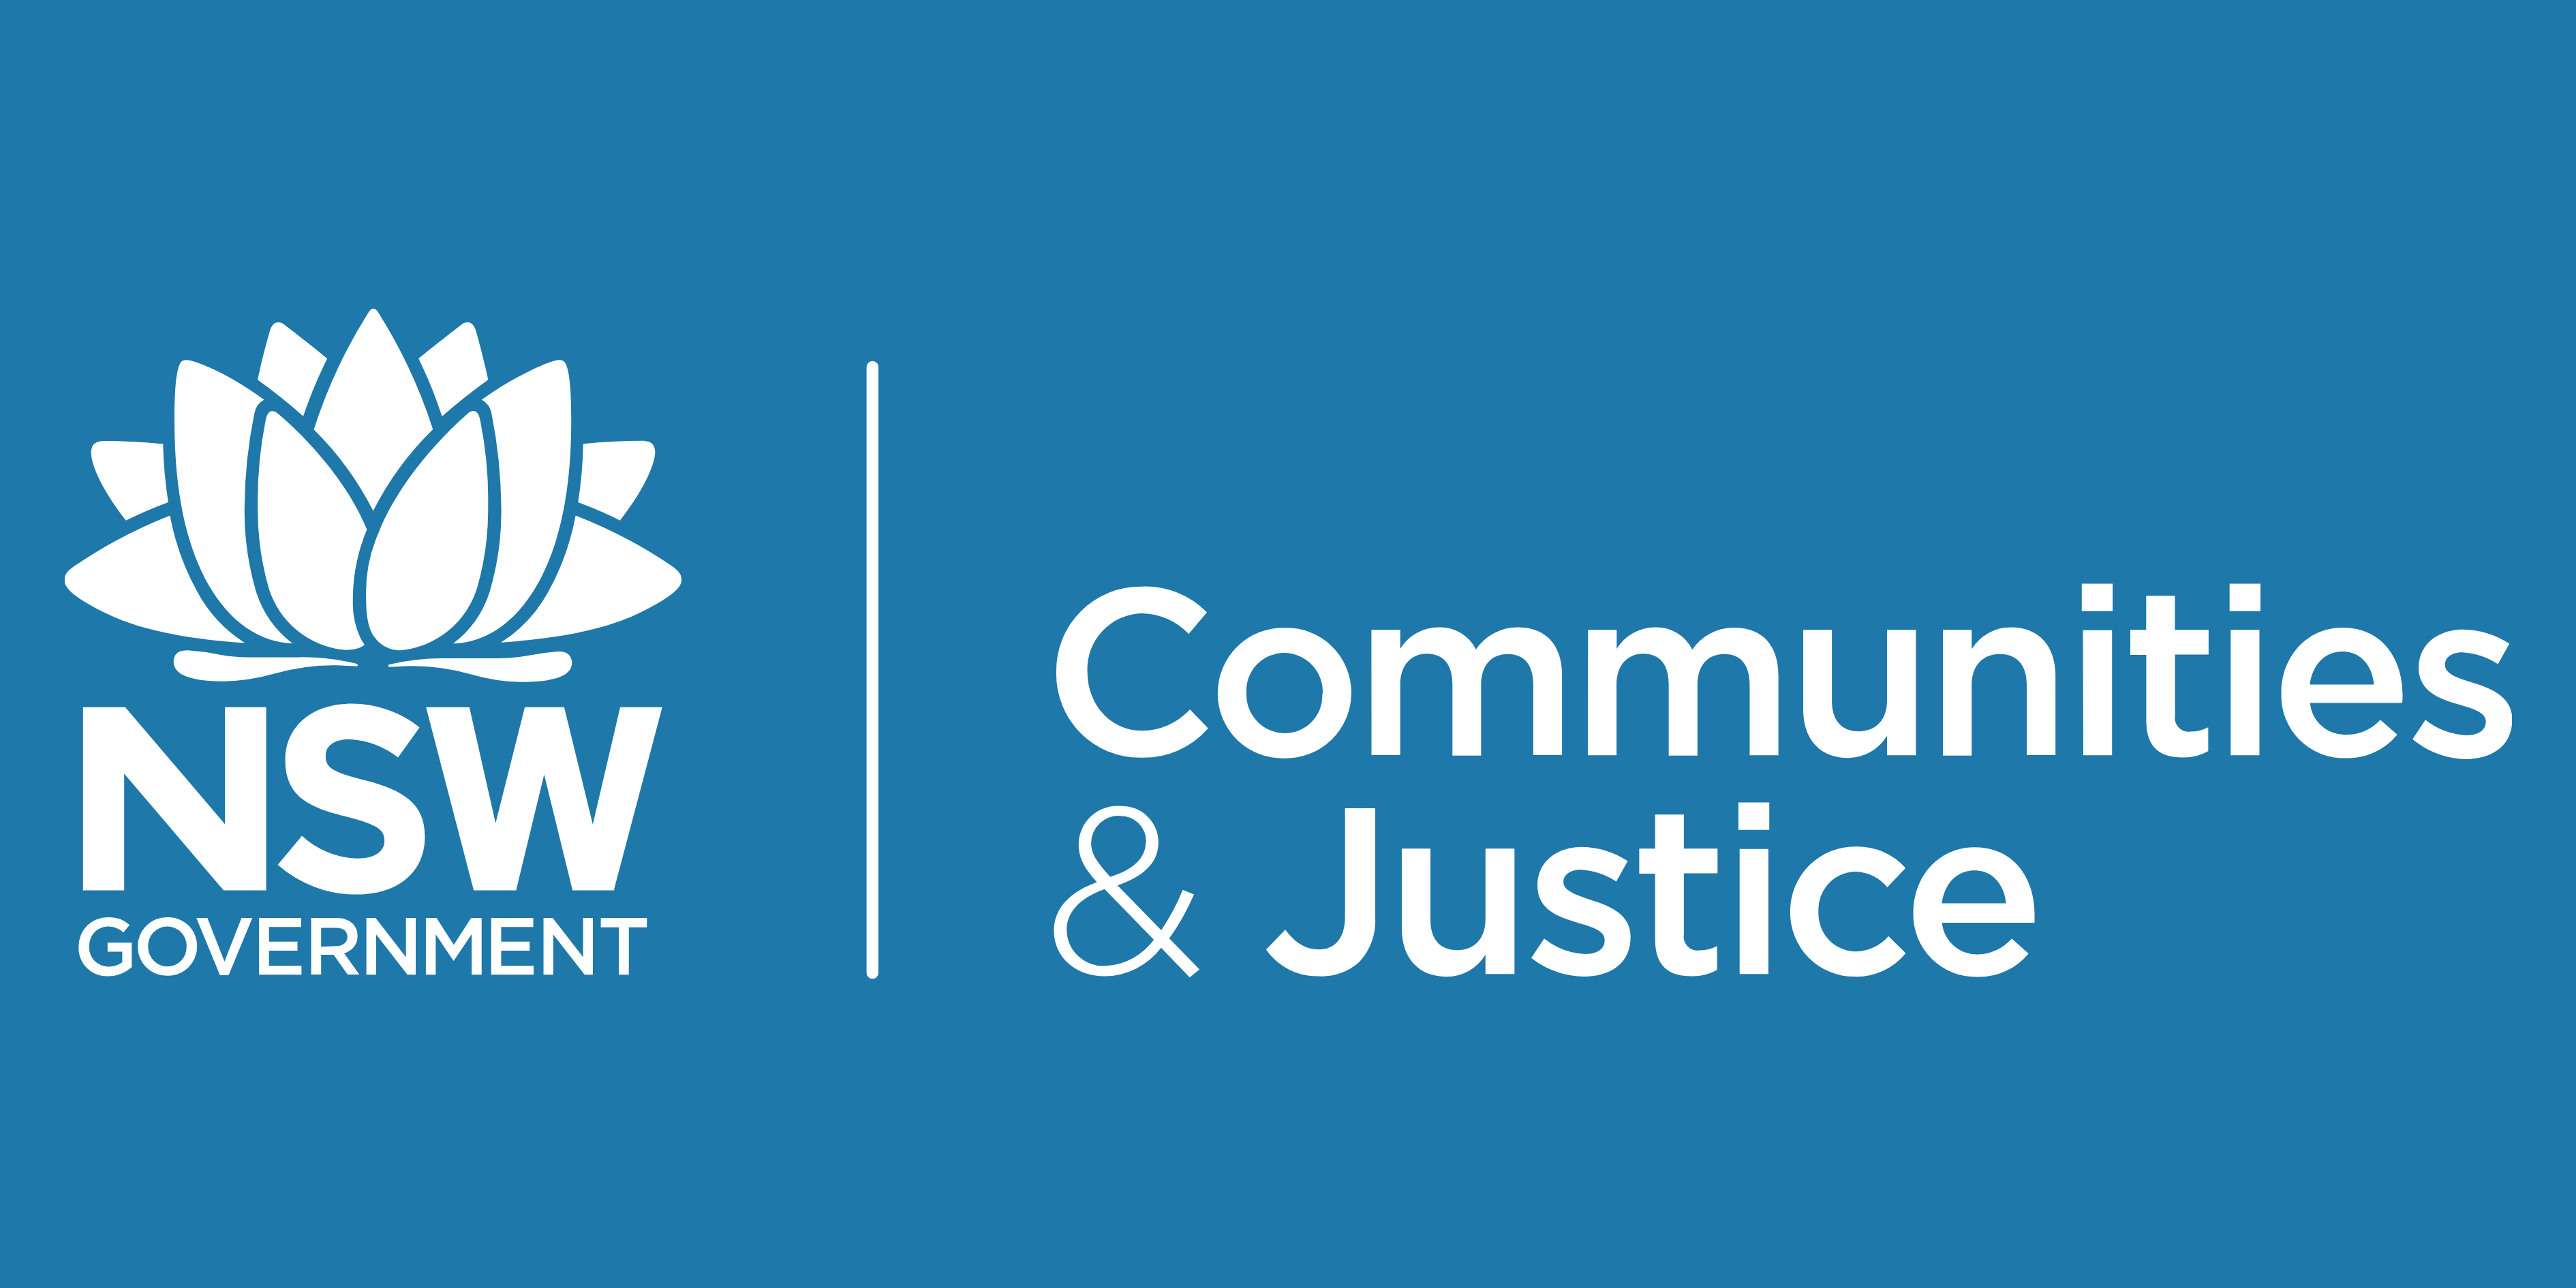 NSW Government Communities & Justice